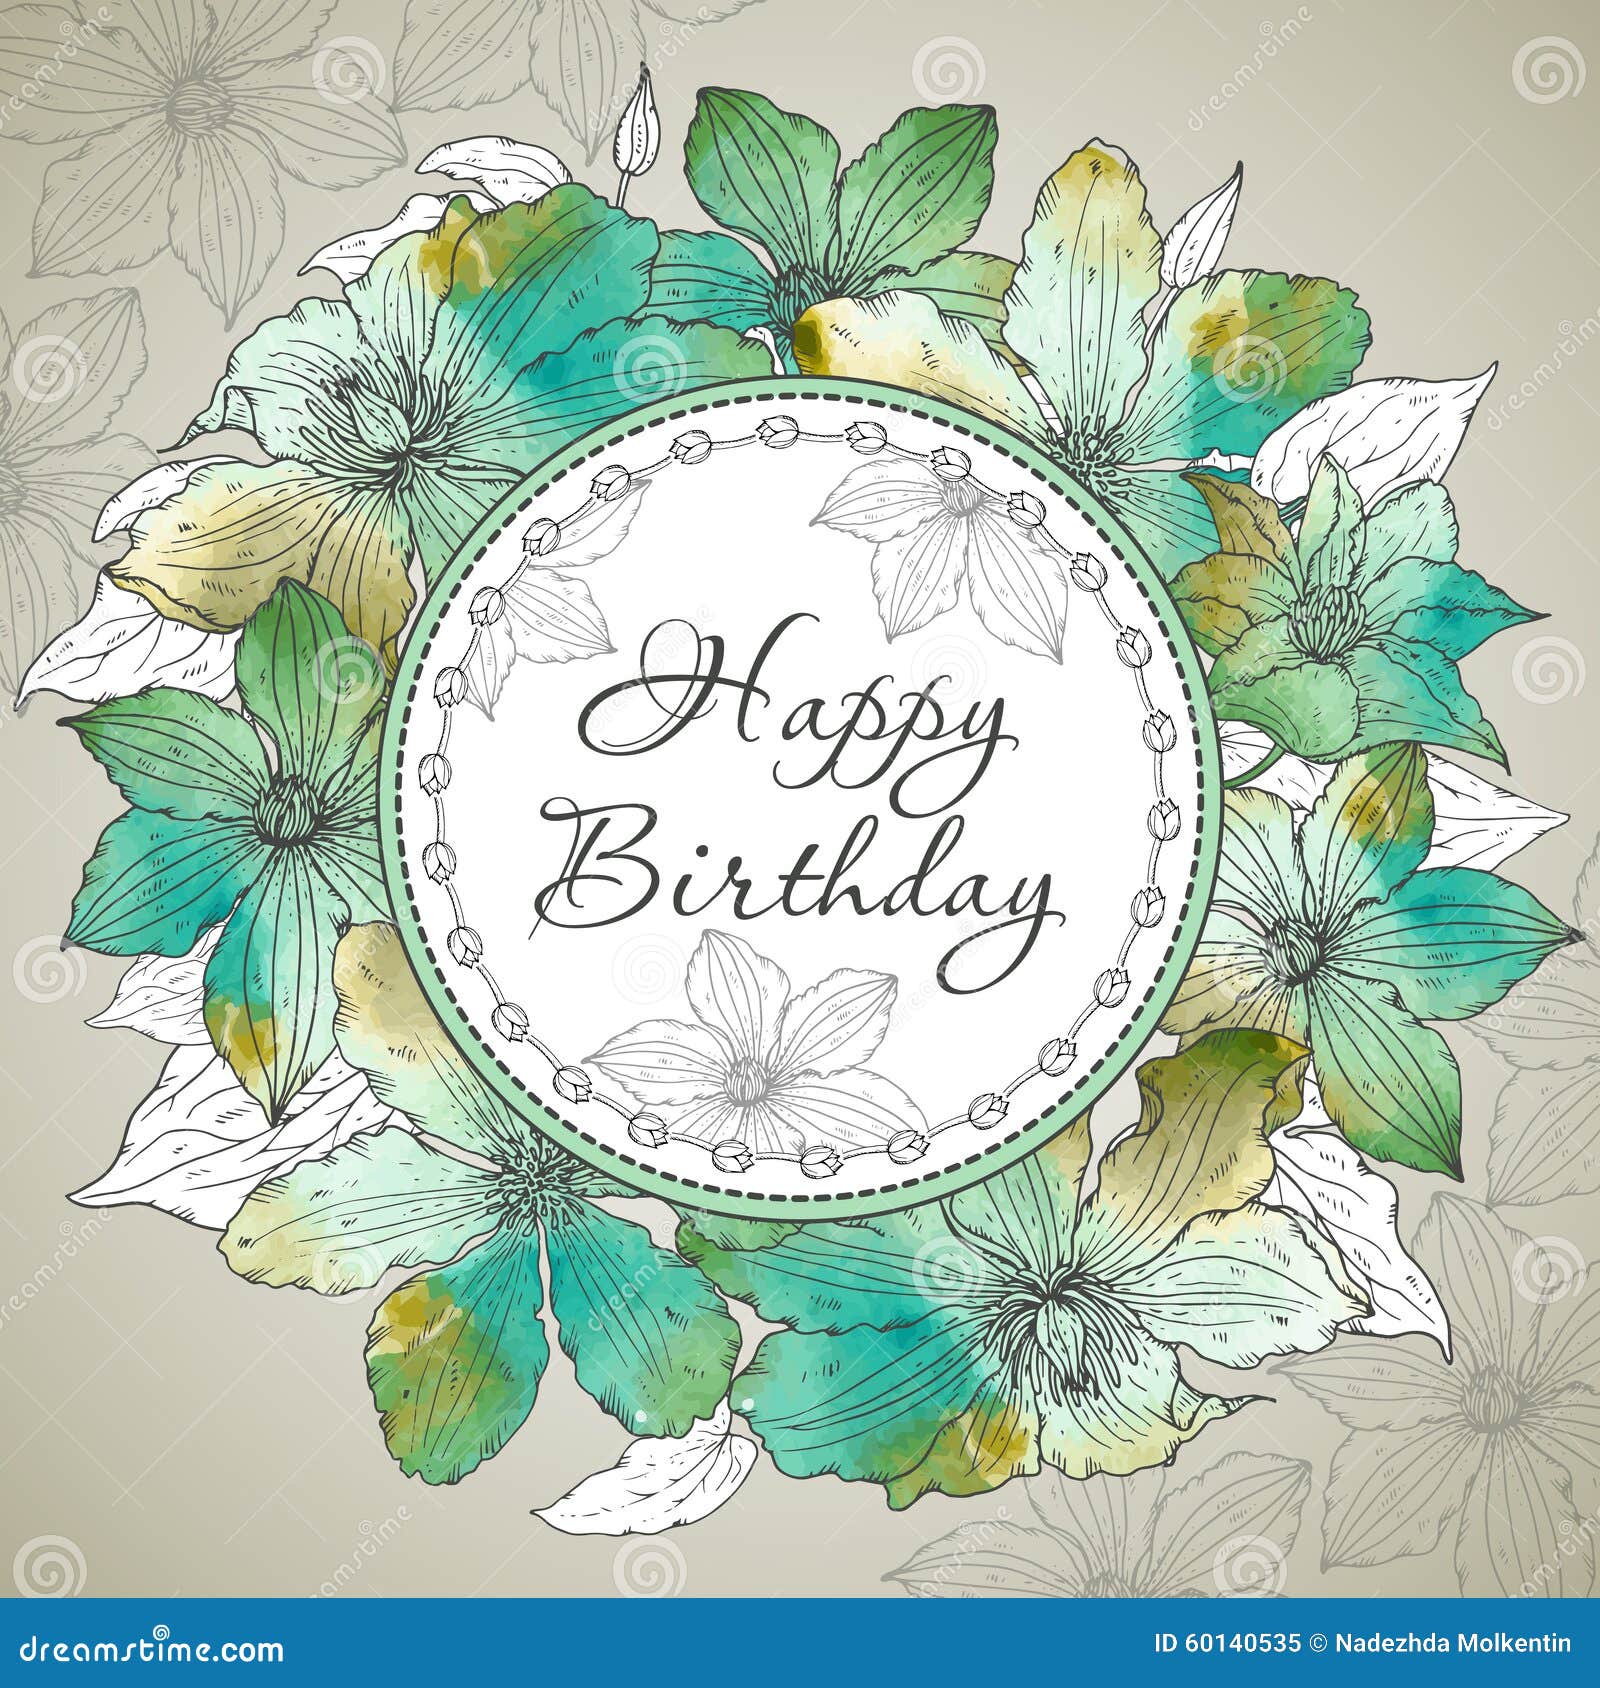 Vector Happy Birthday Greeting Card with Beautiful Clematis Flow ...